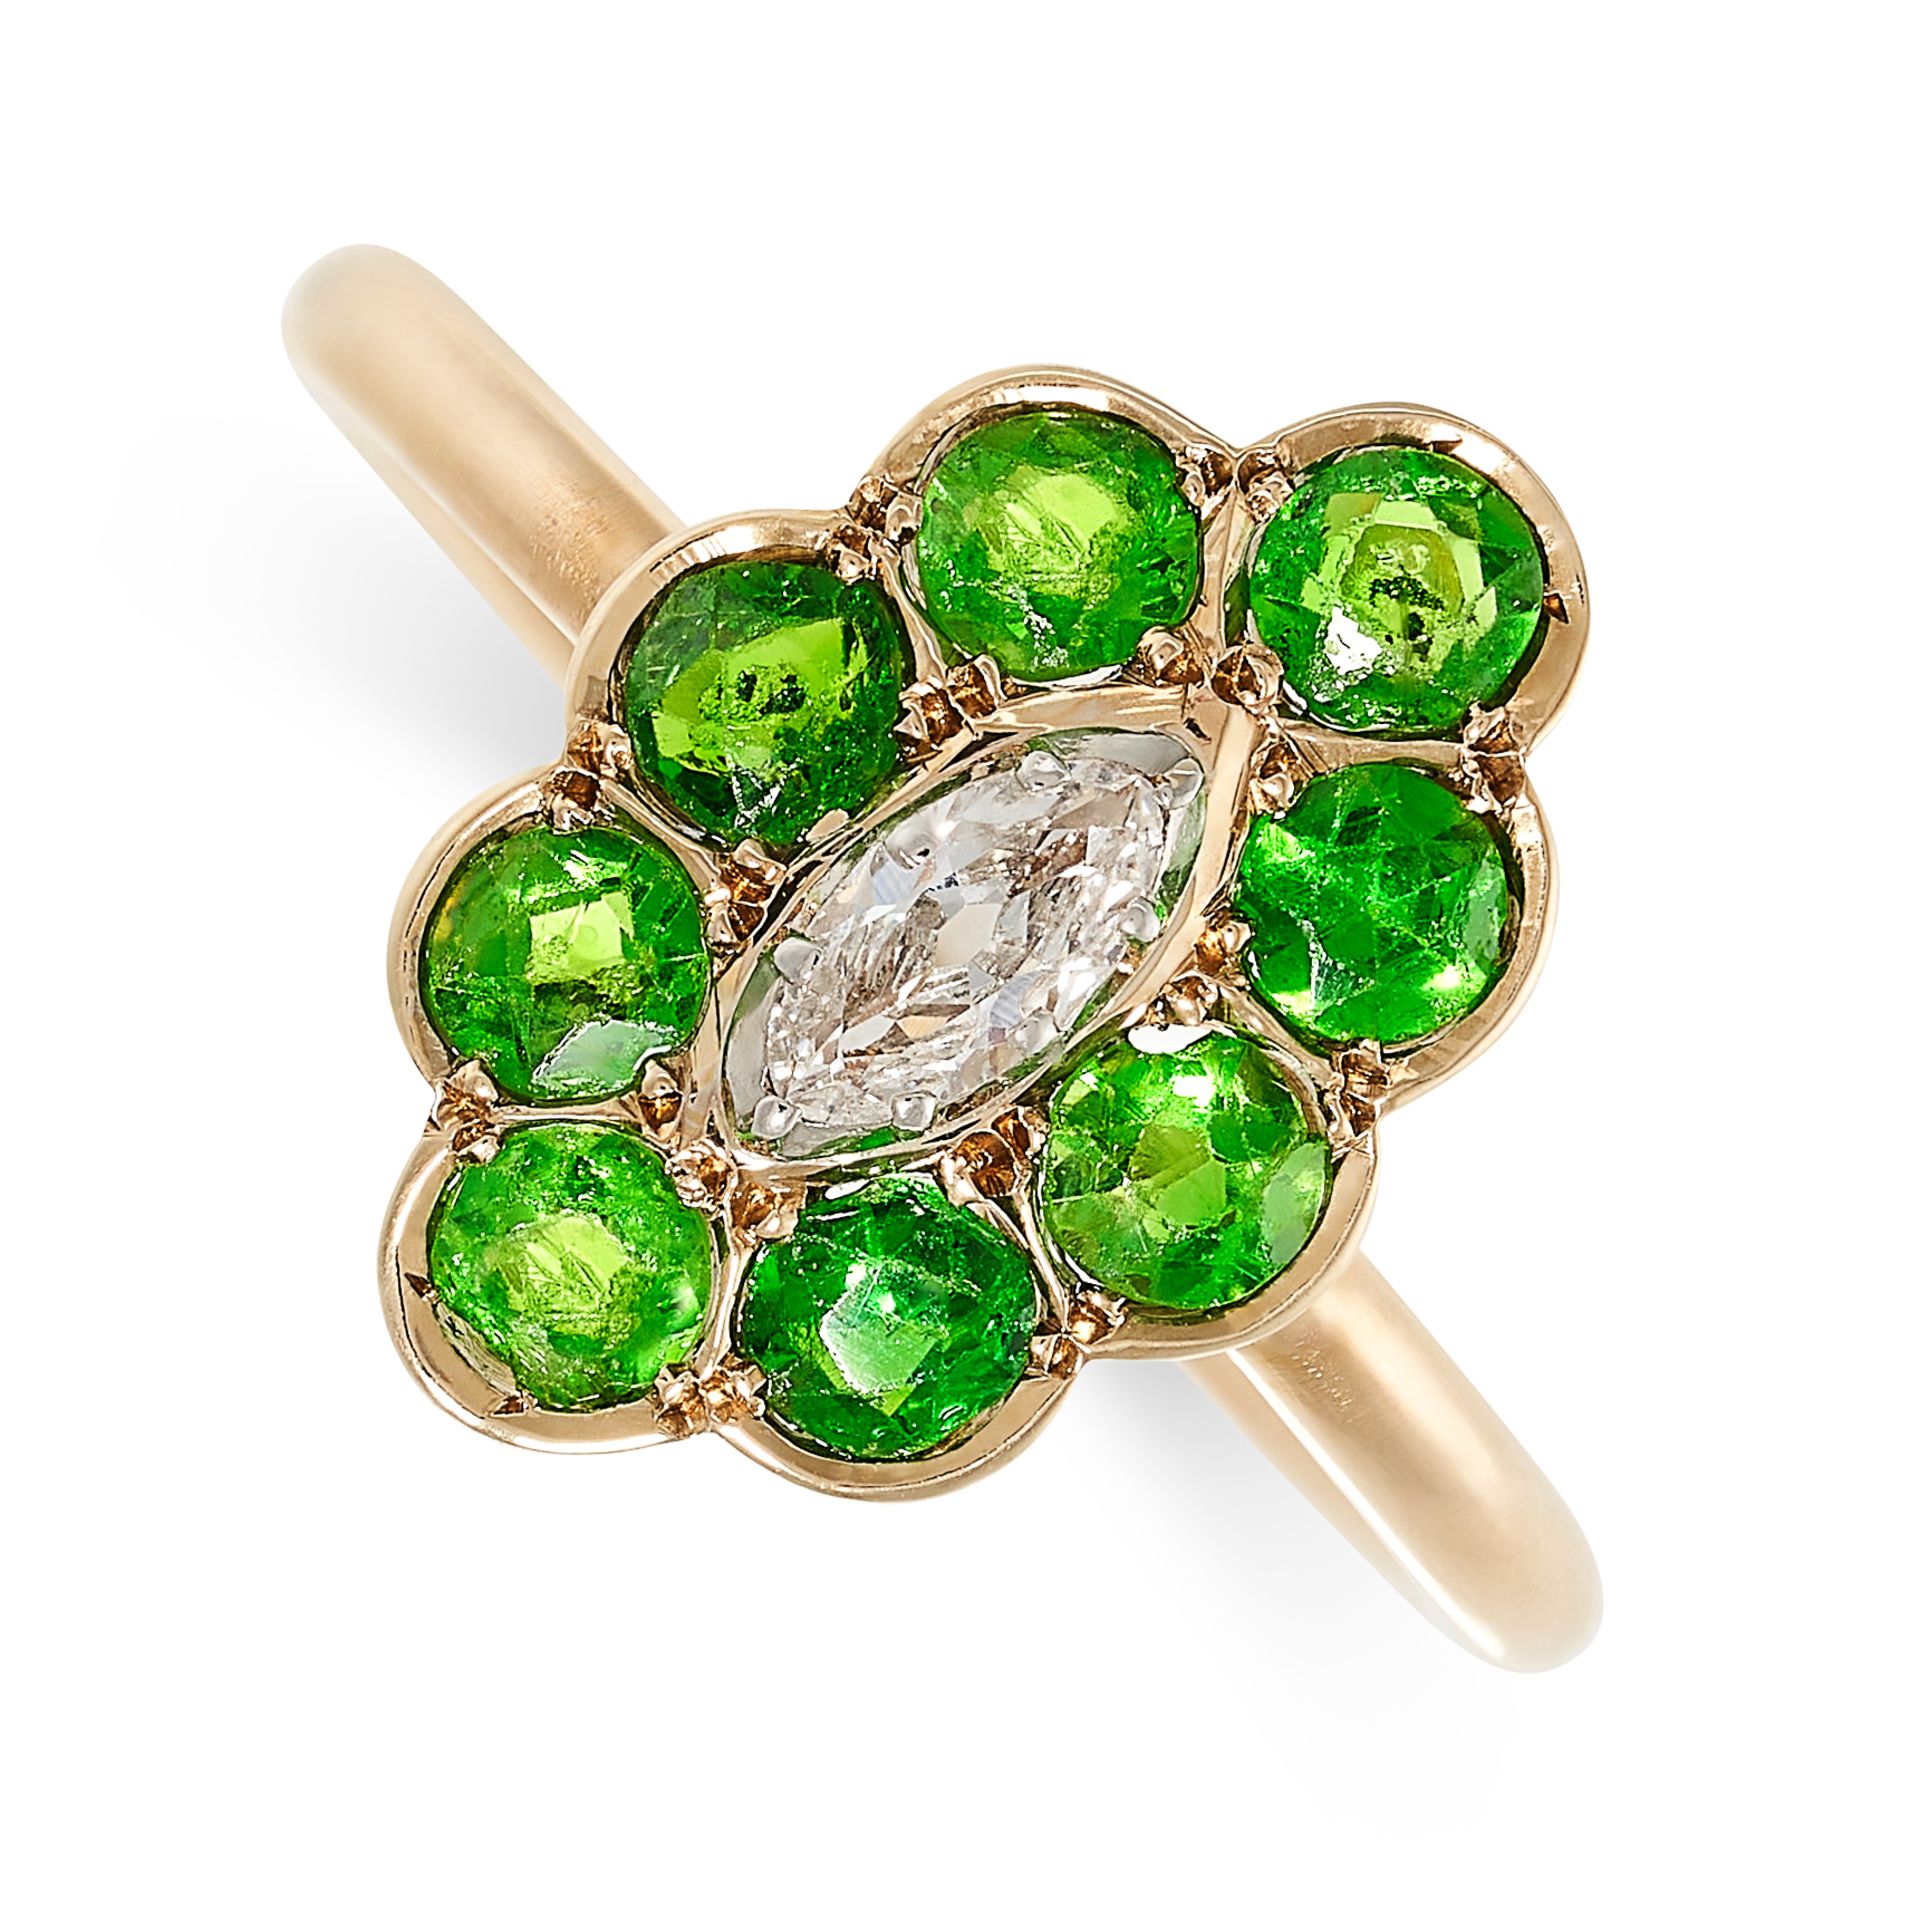 A DEMANTOID GARNET AND DIAMOND RING the navette face set with a central a marquise cut diamond of